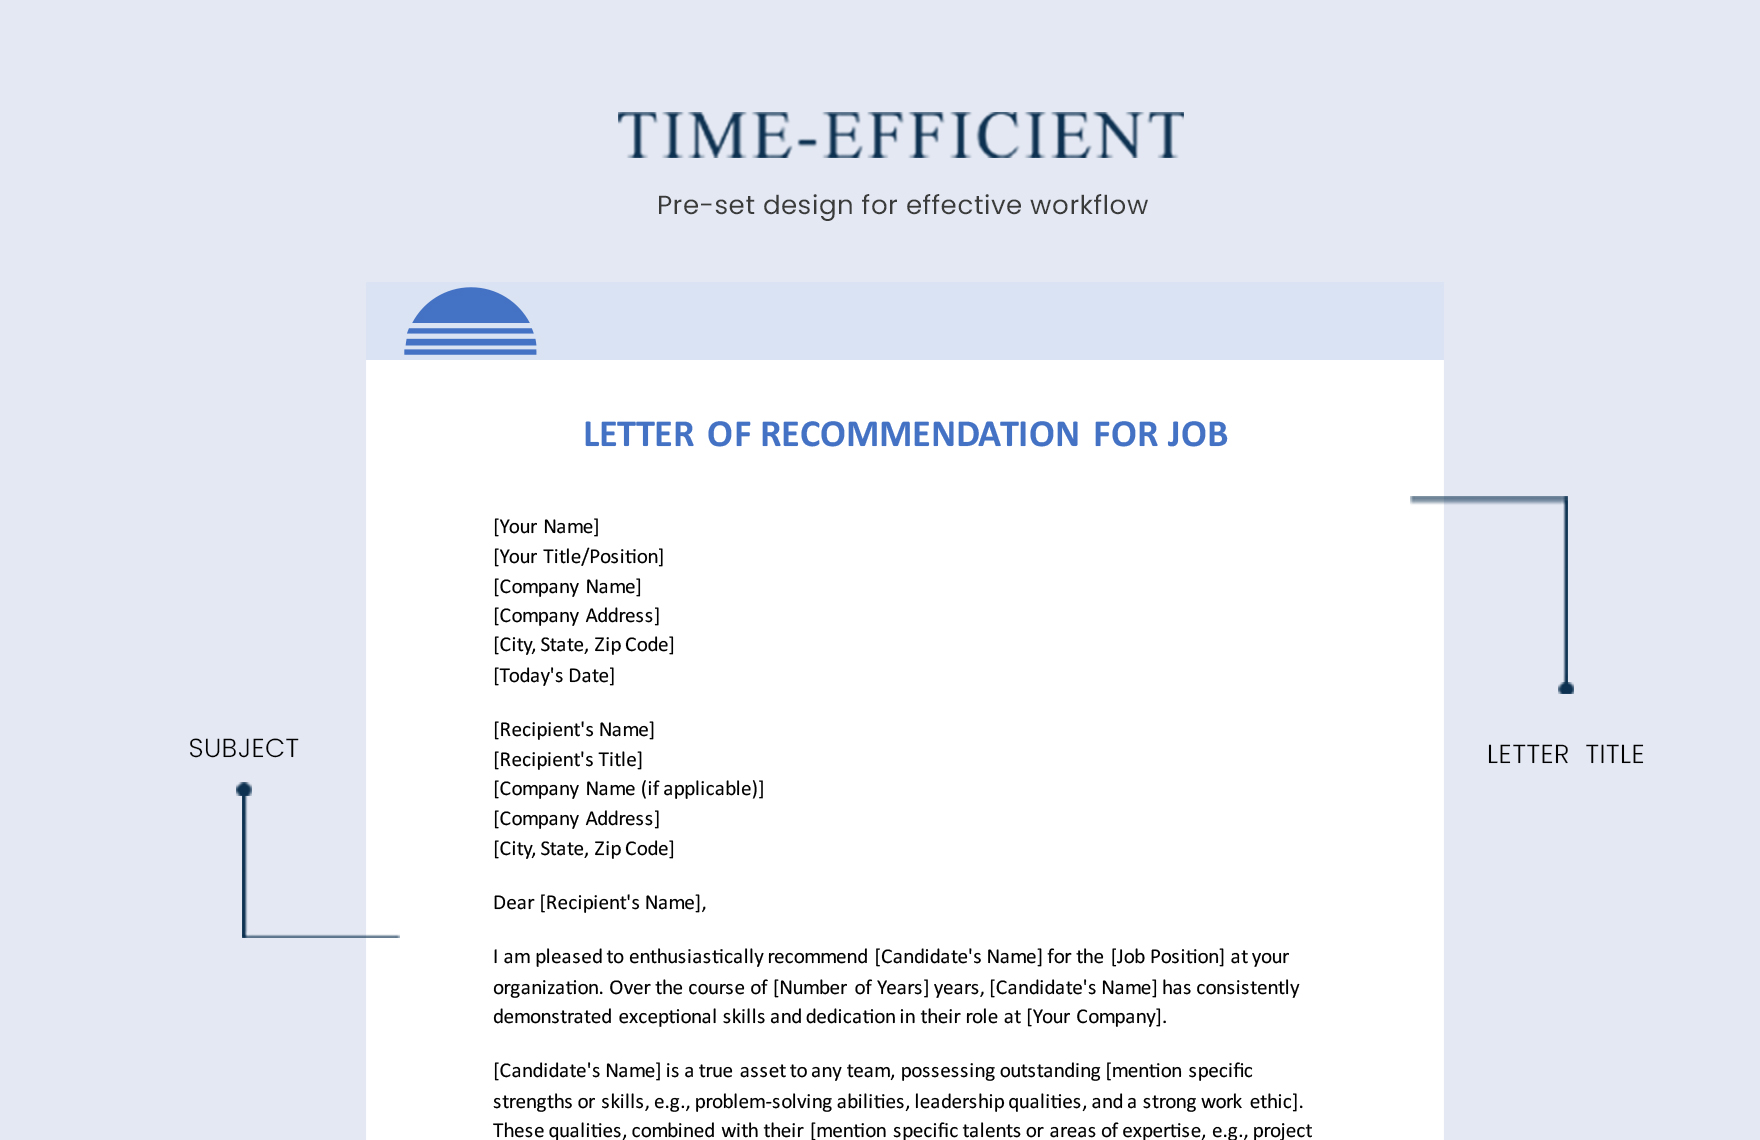 Letter Of Recommendation For Job